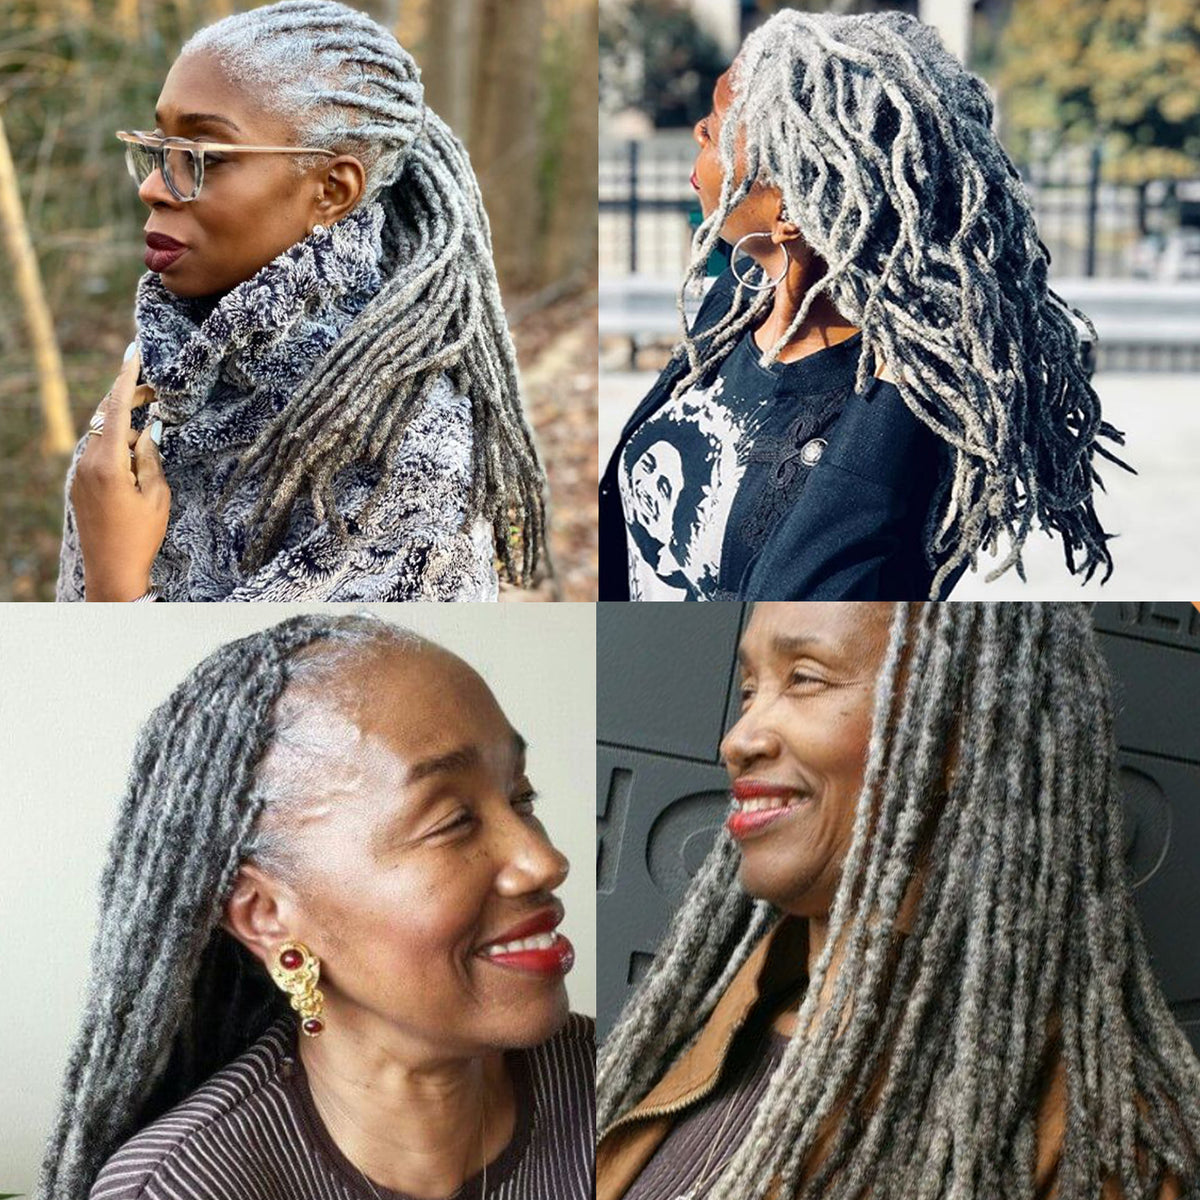 100% Human Hair Dreadlock Extensions 16 Inch 10 Strands Handmade Natural Loc Extensions Human Hair Dreads Extensions For Woman & Men Can Be Dyed/Bleached  (16inch 10 strands, 0.4cm Salt & Pepper)